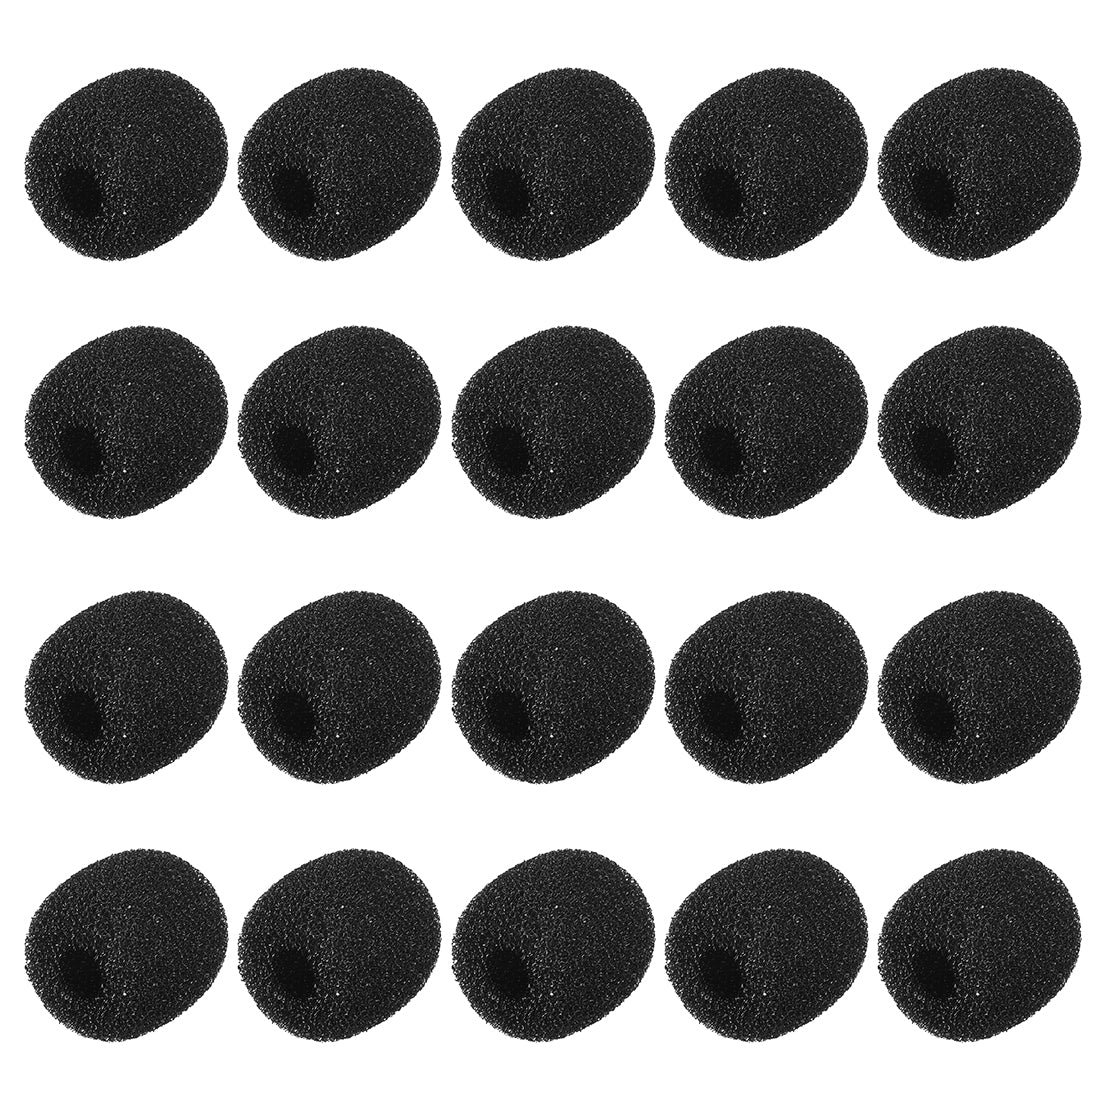 uxcell Uxcell 20PCS Foam Mic Cover Headset Microphone Windscreen Shield Protection 17mm Length for Headset Lapel Lavalier